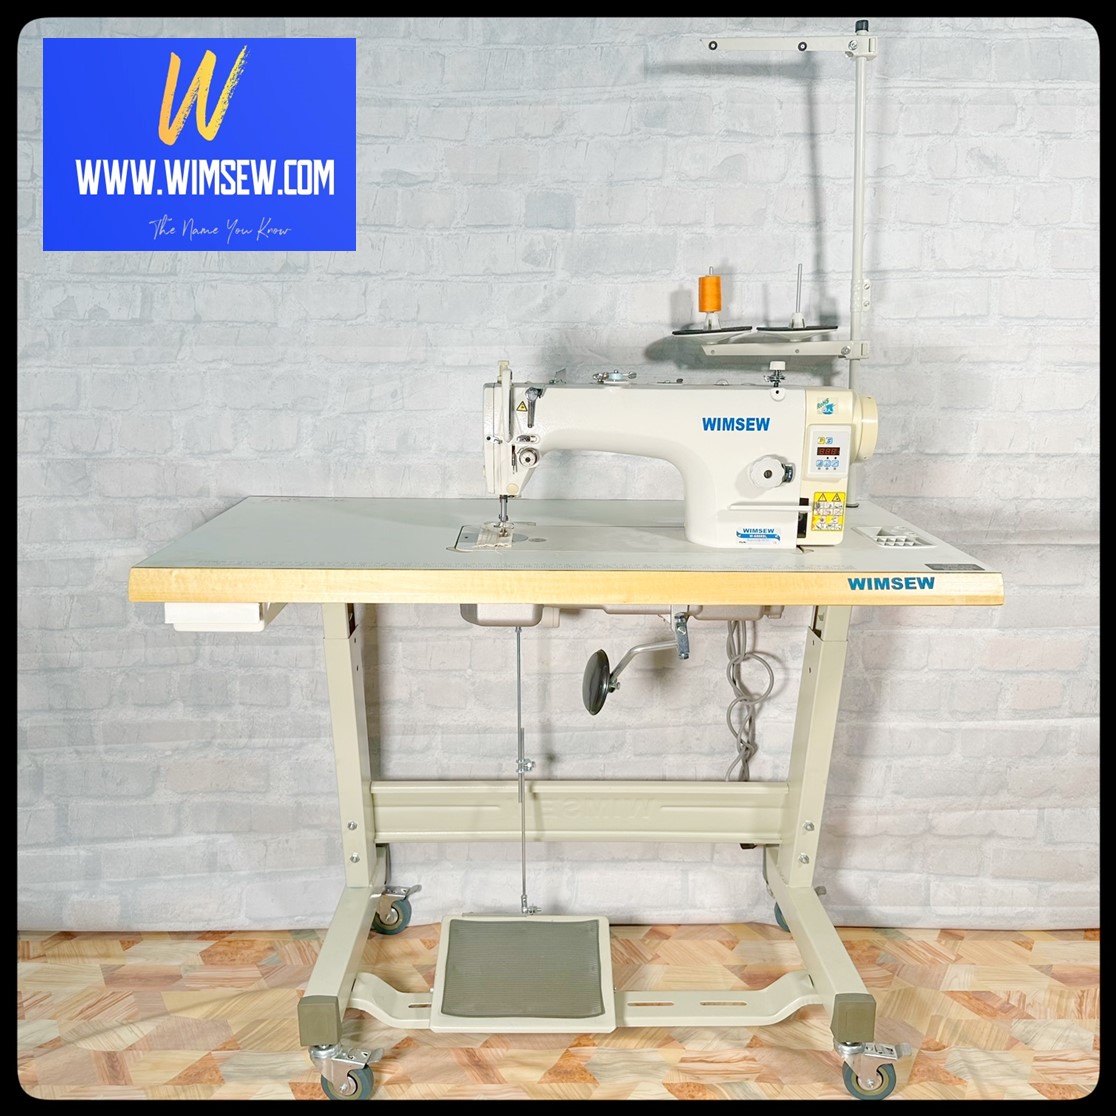 WIMSEW 6900 Sewliner 2 ED (Wheel Stand)  - Call now for more information. 020 8767 0036 - choose option 3